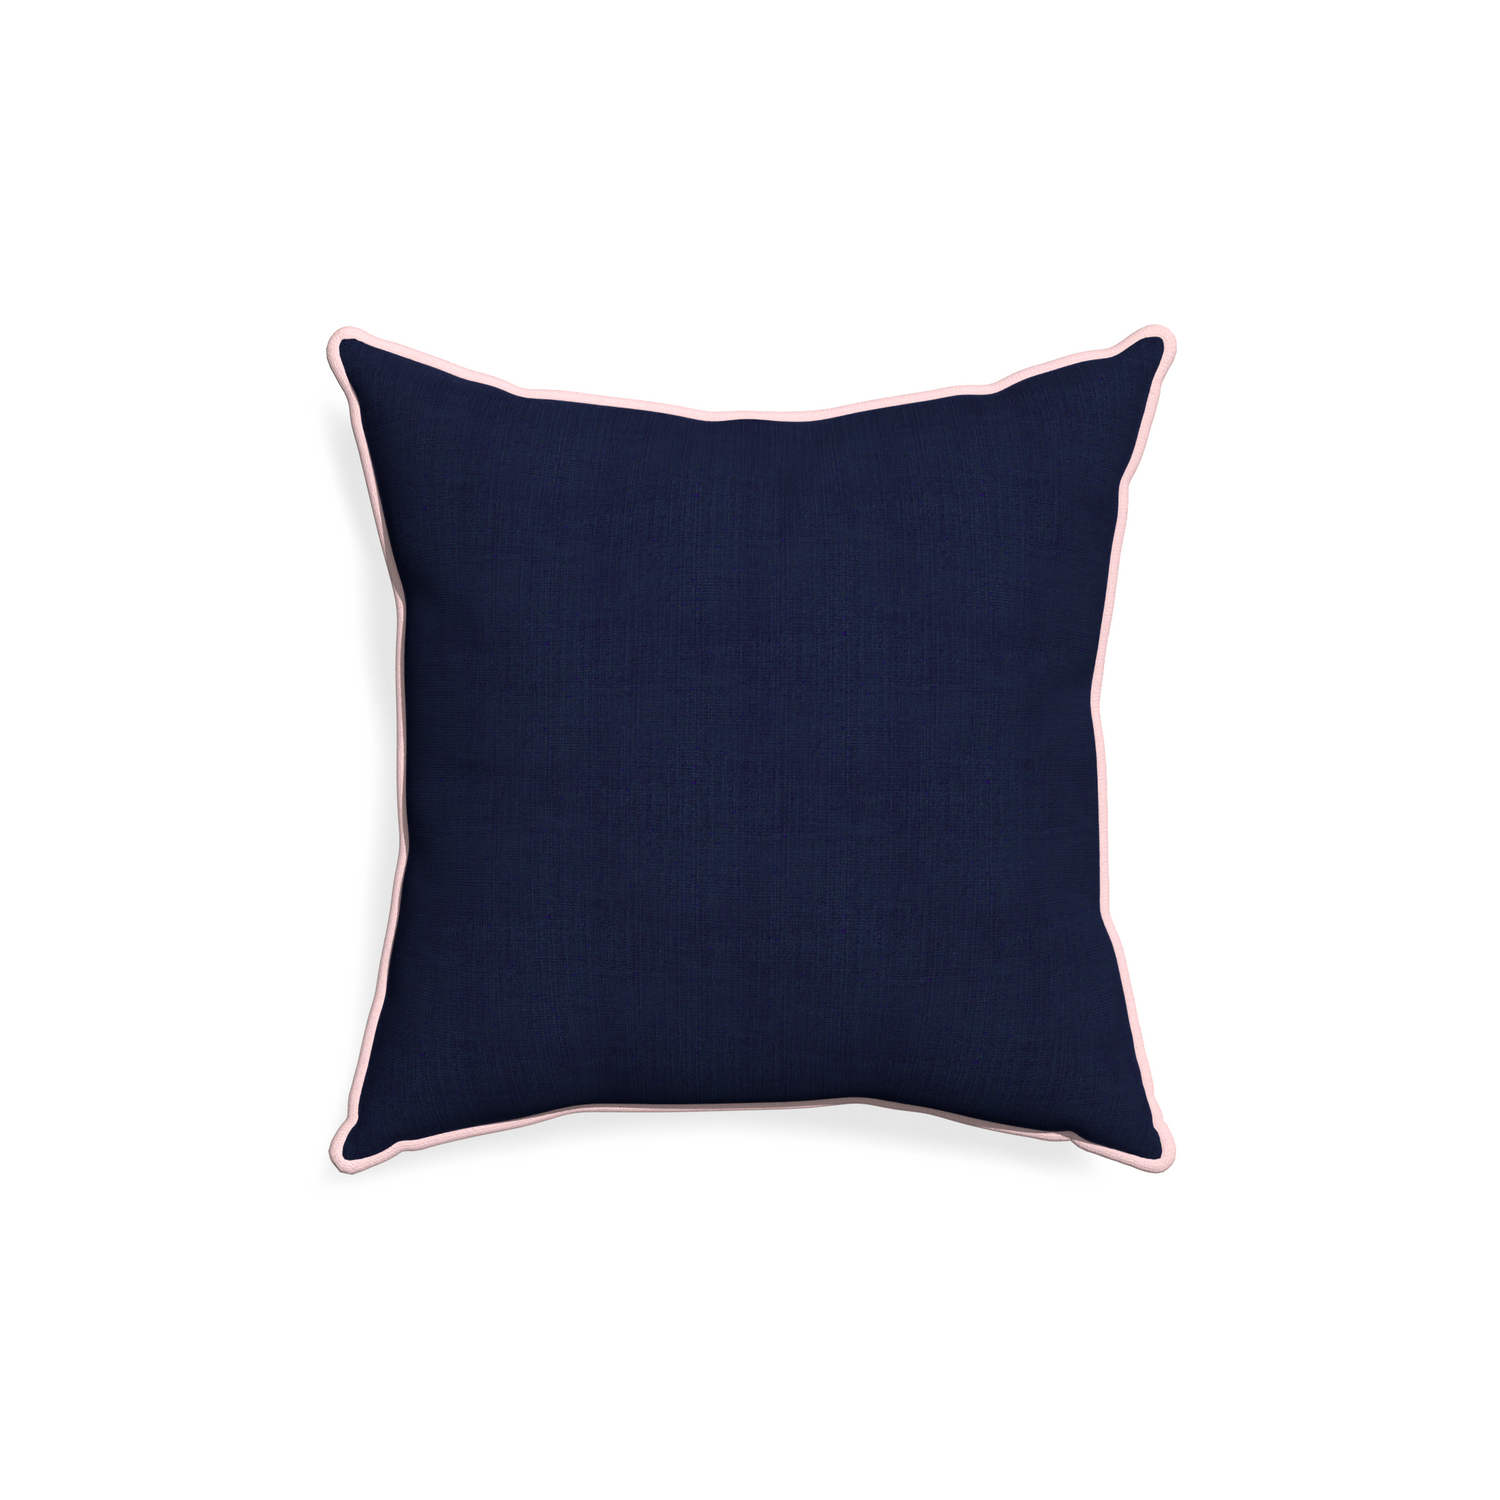 18-square midnight custom navy bluepillow with petal piping on white background